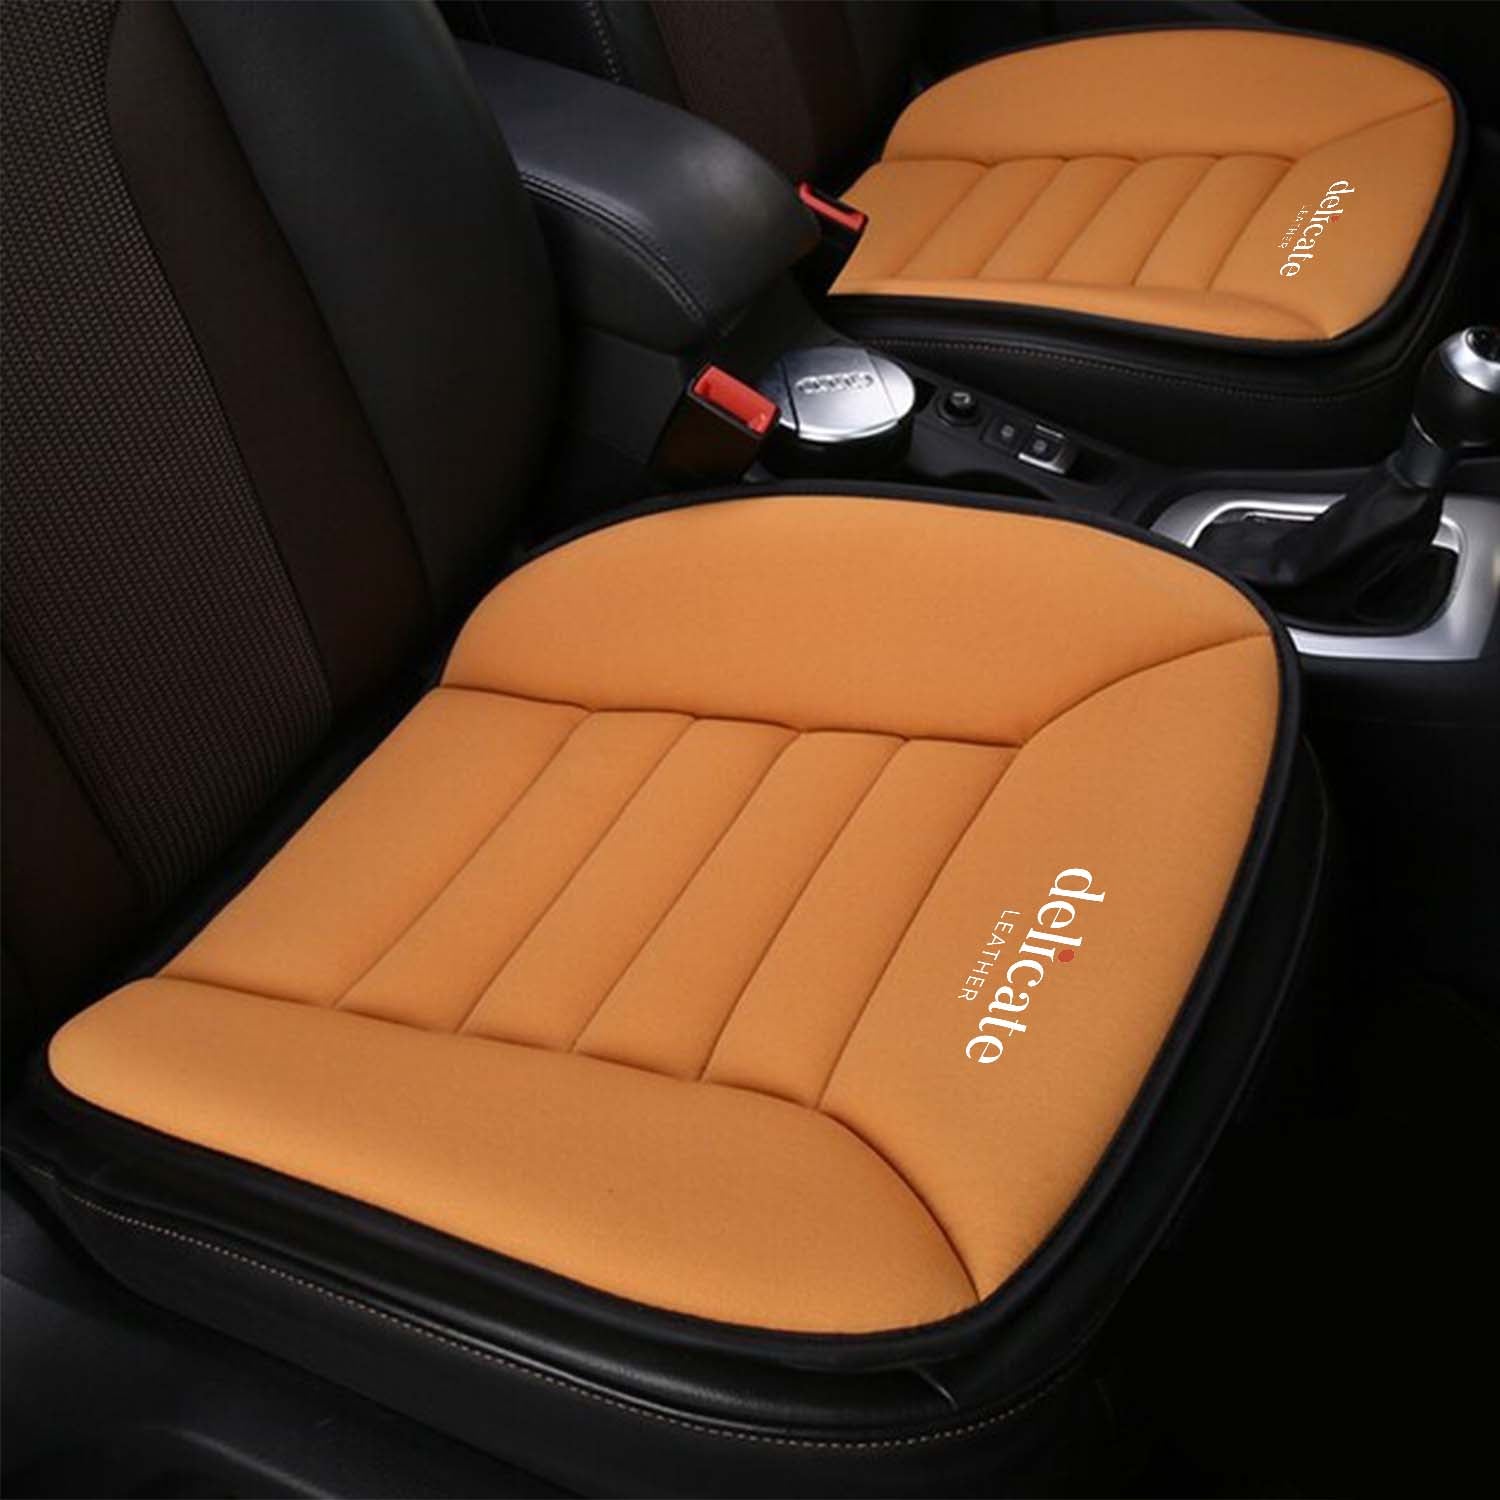 Car Seat Cushion with 1.2inch Comfort Memory Foam, Custom Fit For Your Cars, Seat Cushion for Car and Office Chair CH19989